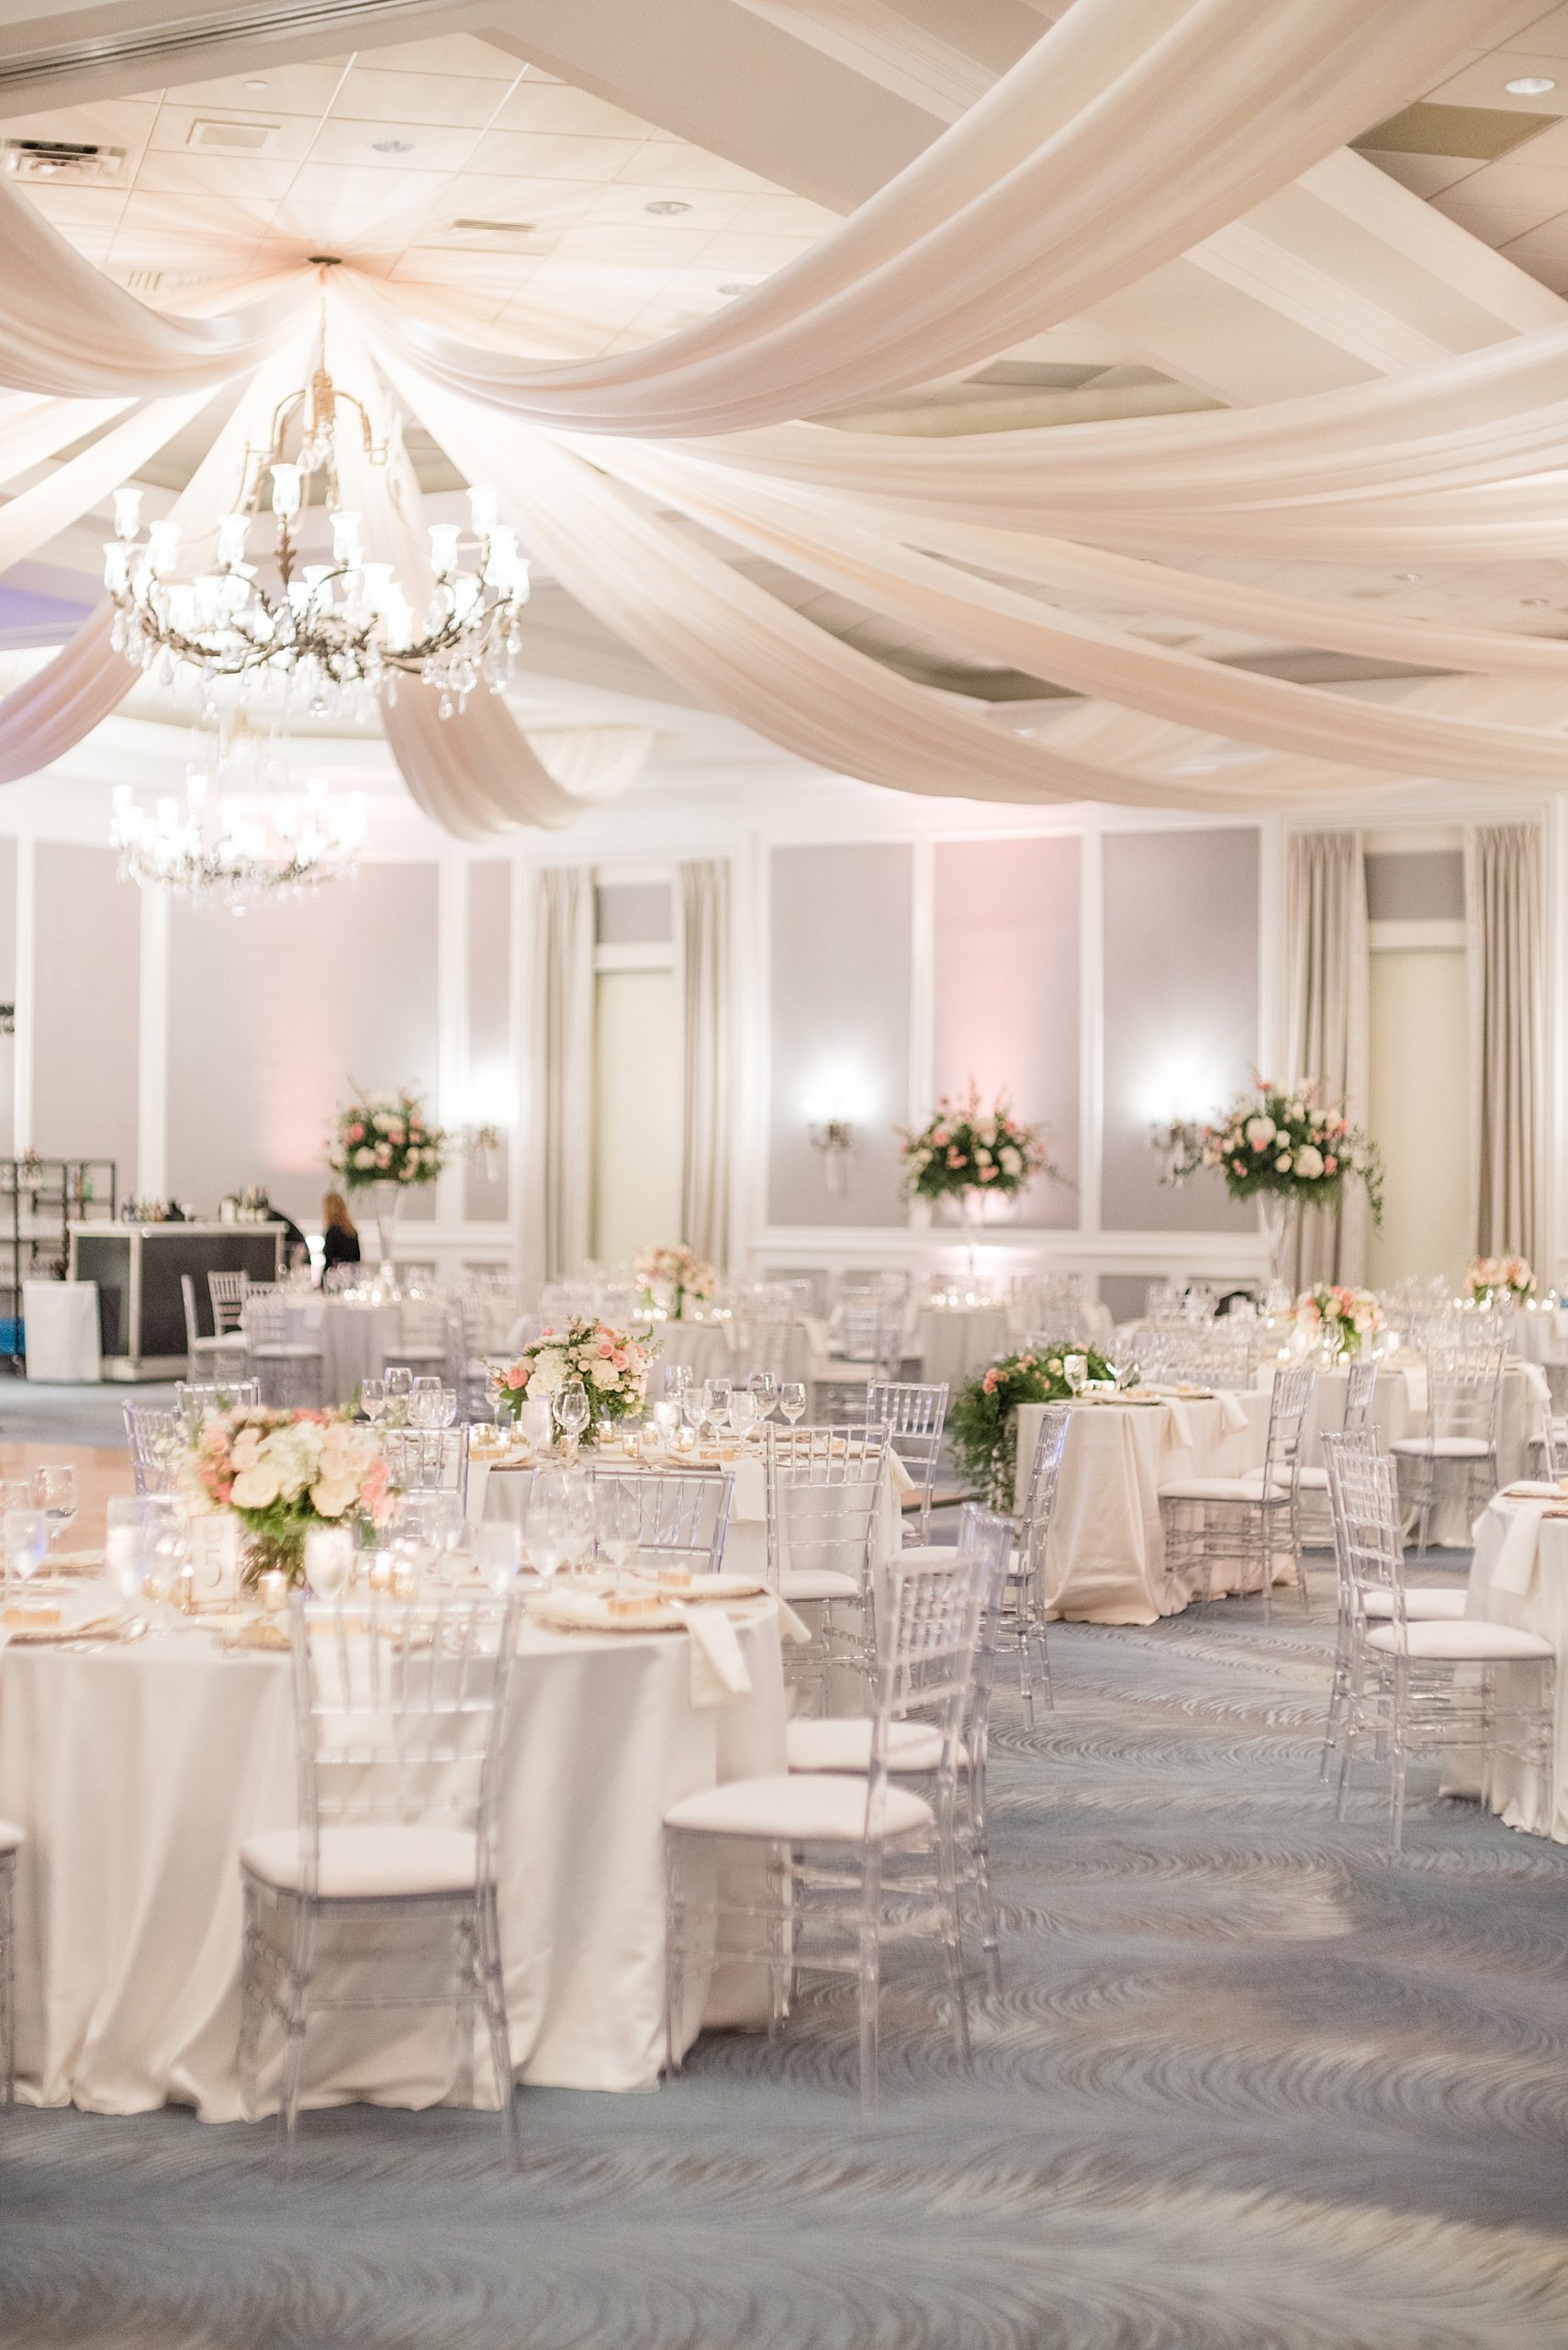 Ballantyne Country Club wedding reception with pink and ivory details